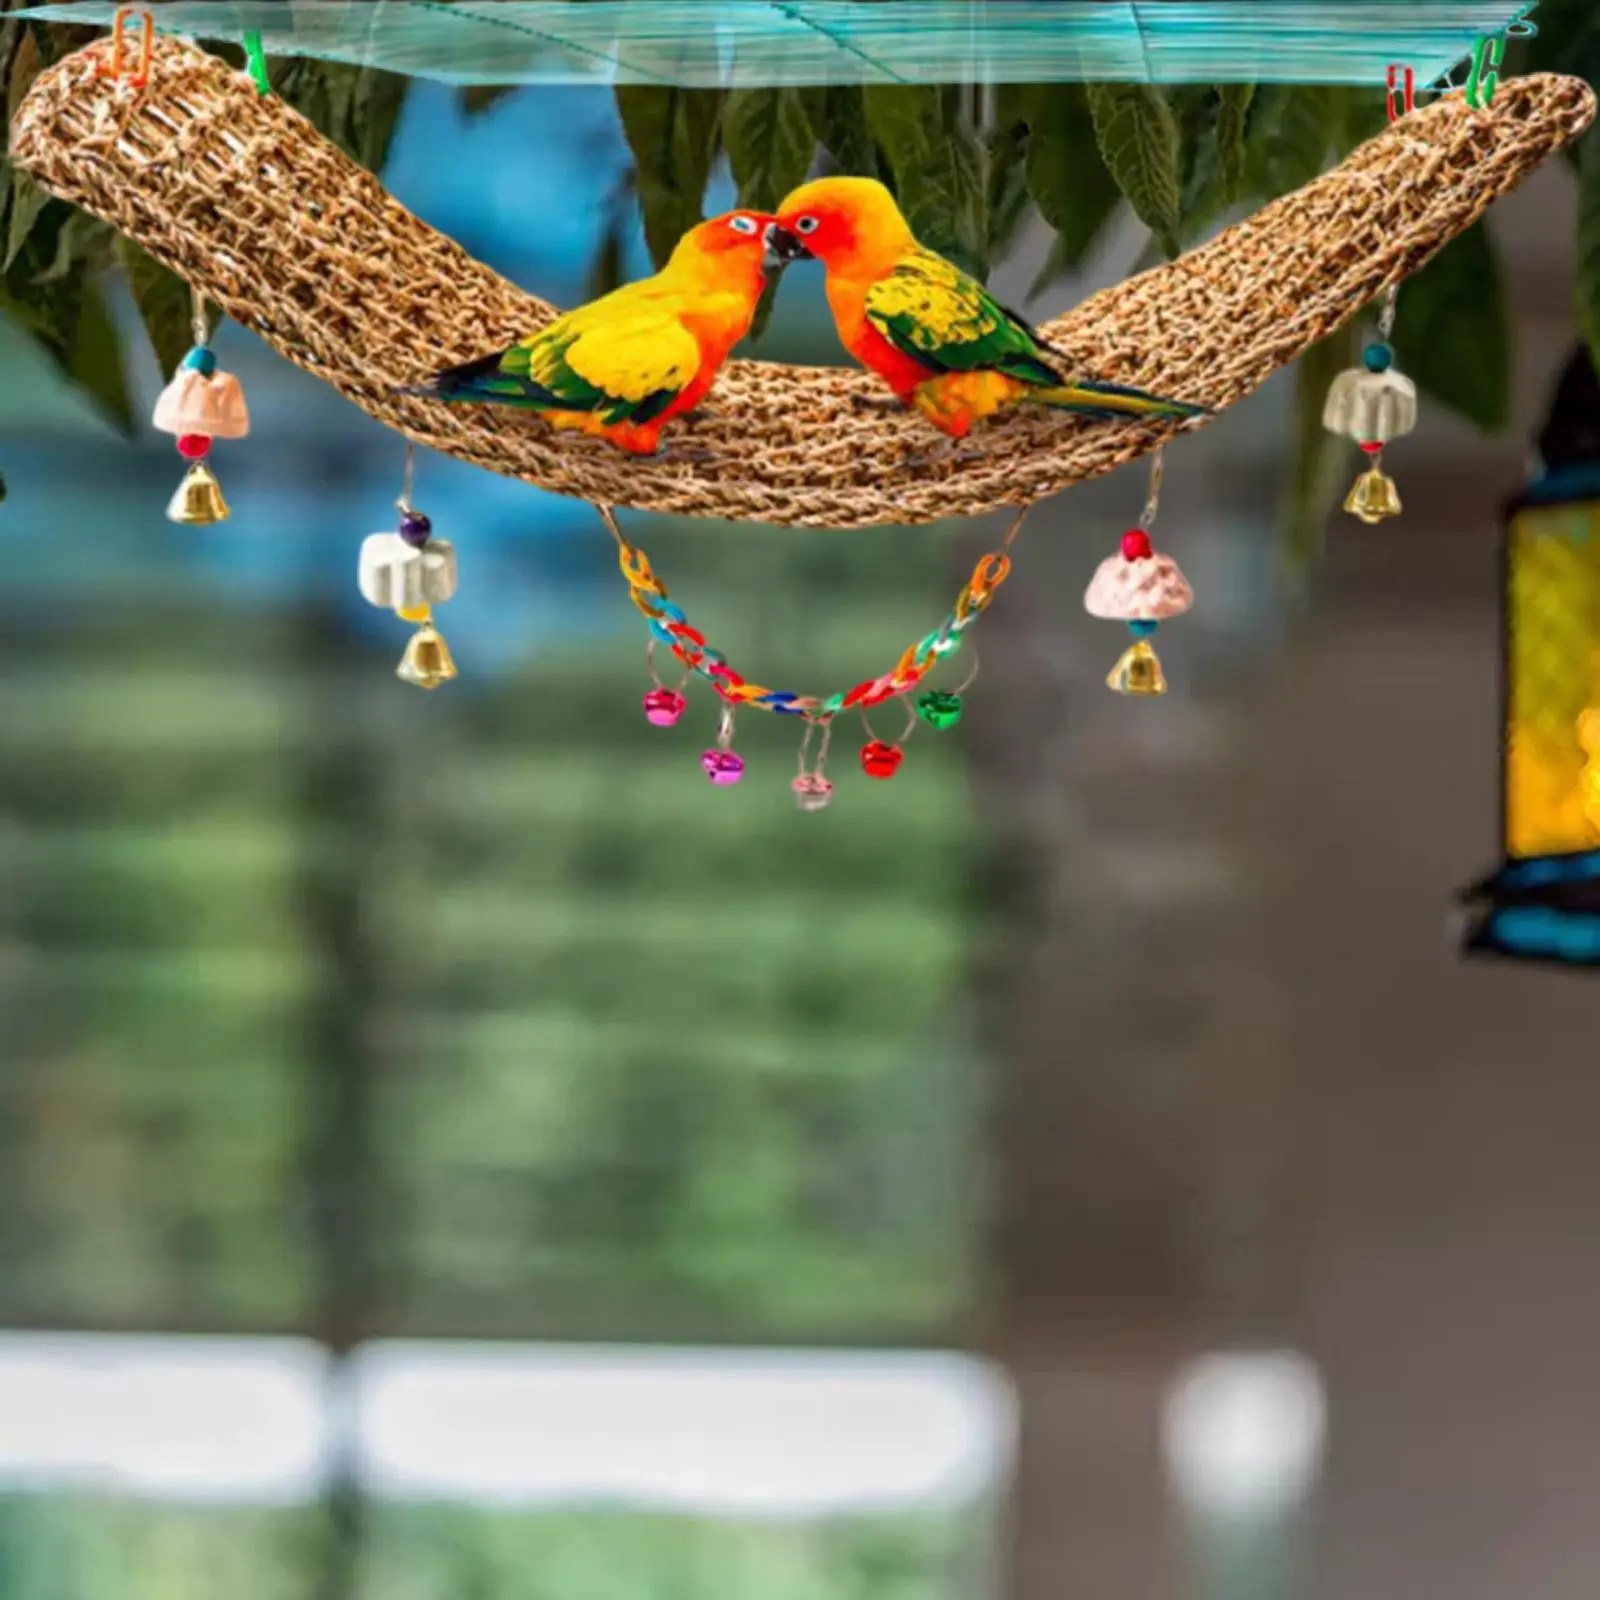 Parrots Stand Climbing Net Hanging Accessory Hammock for Birds Macaws